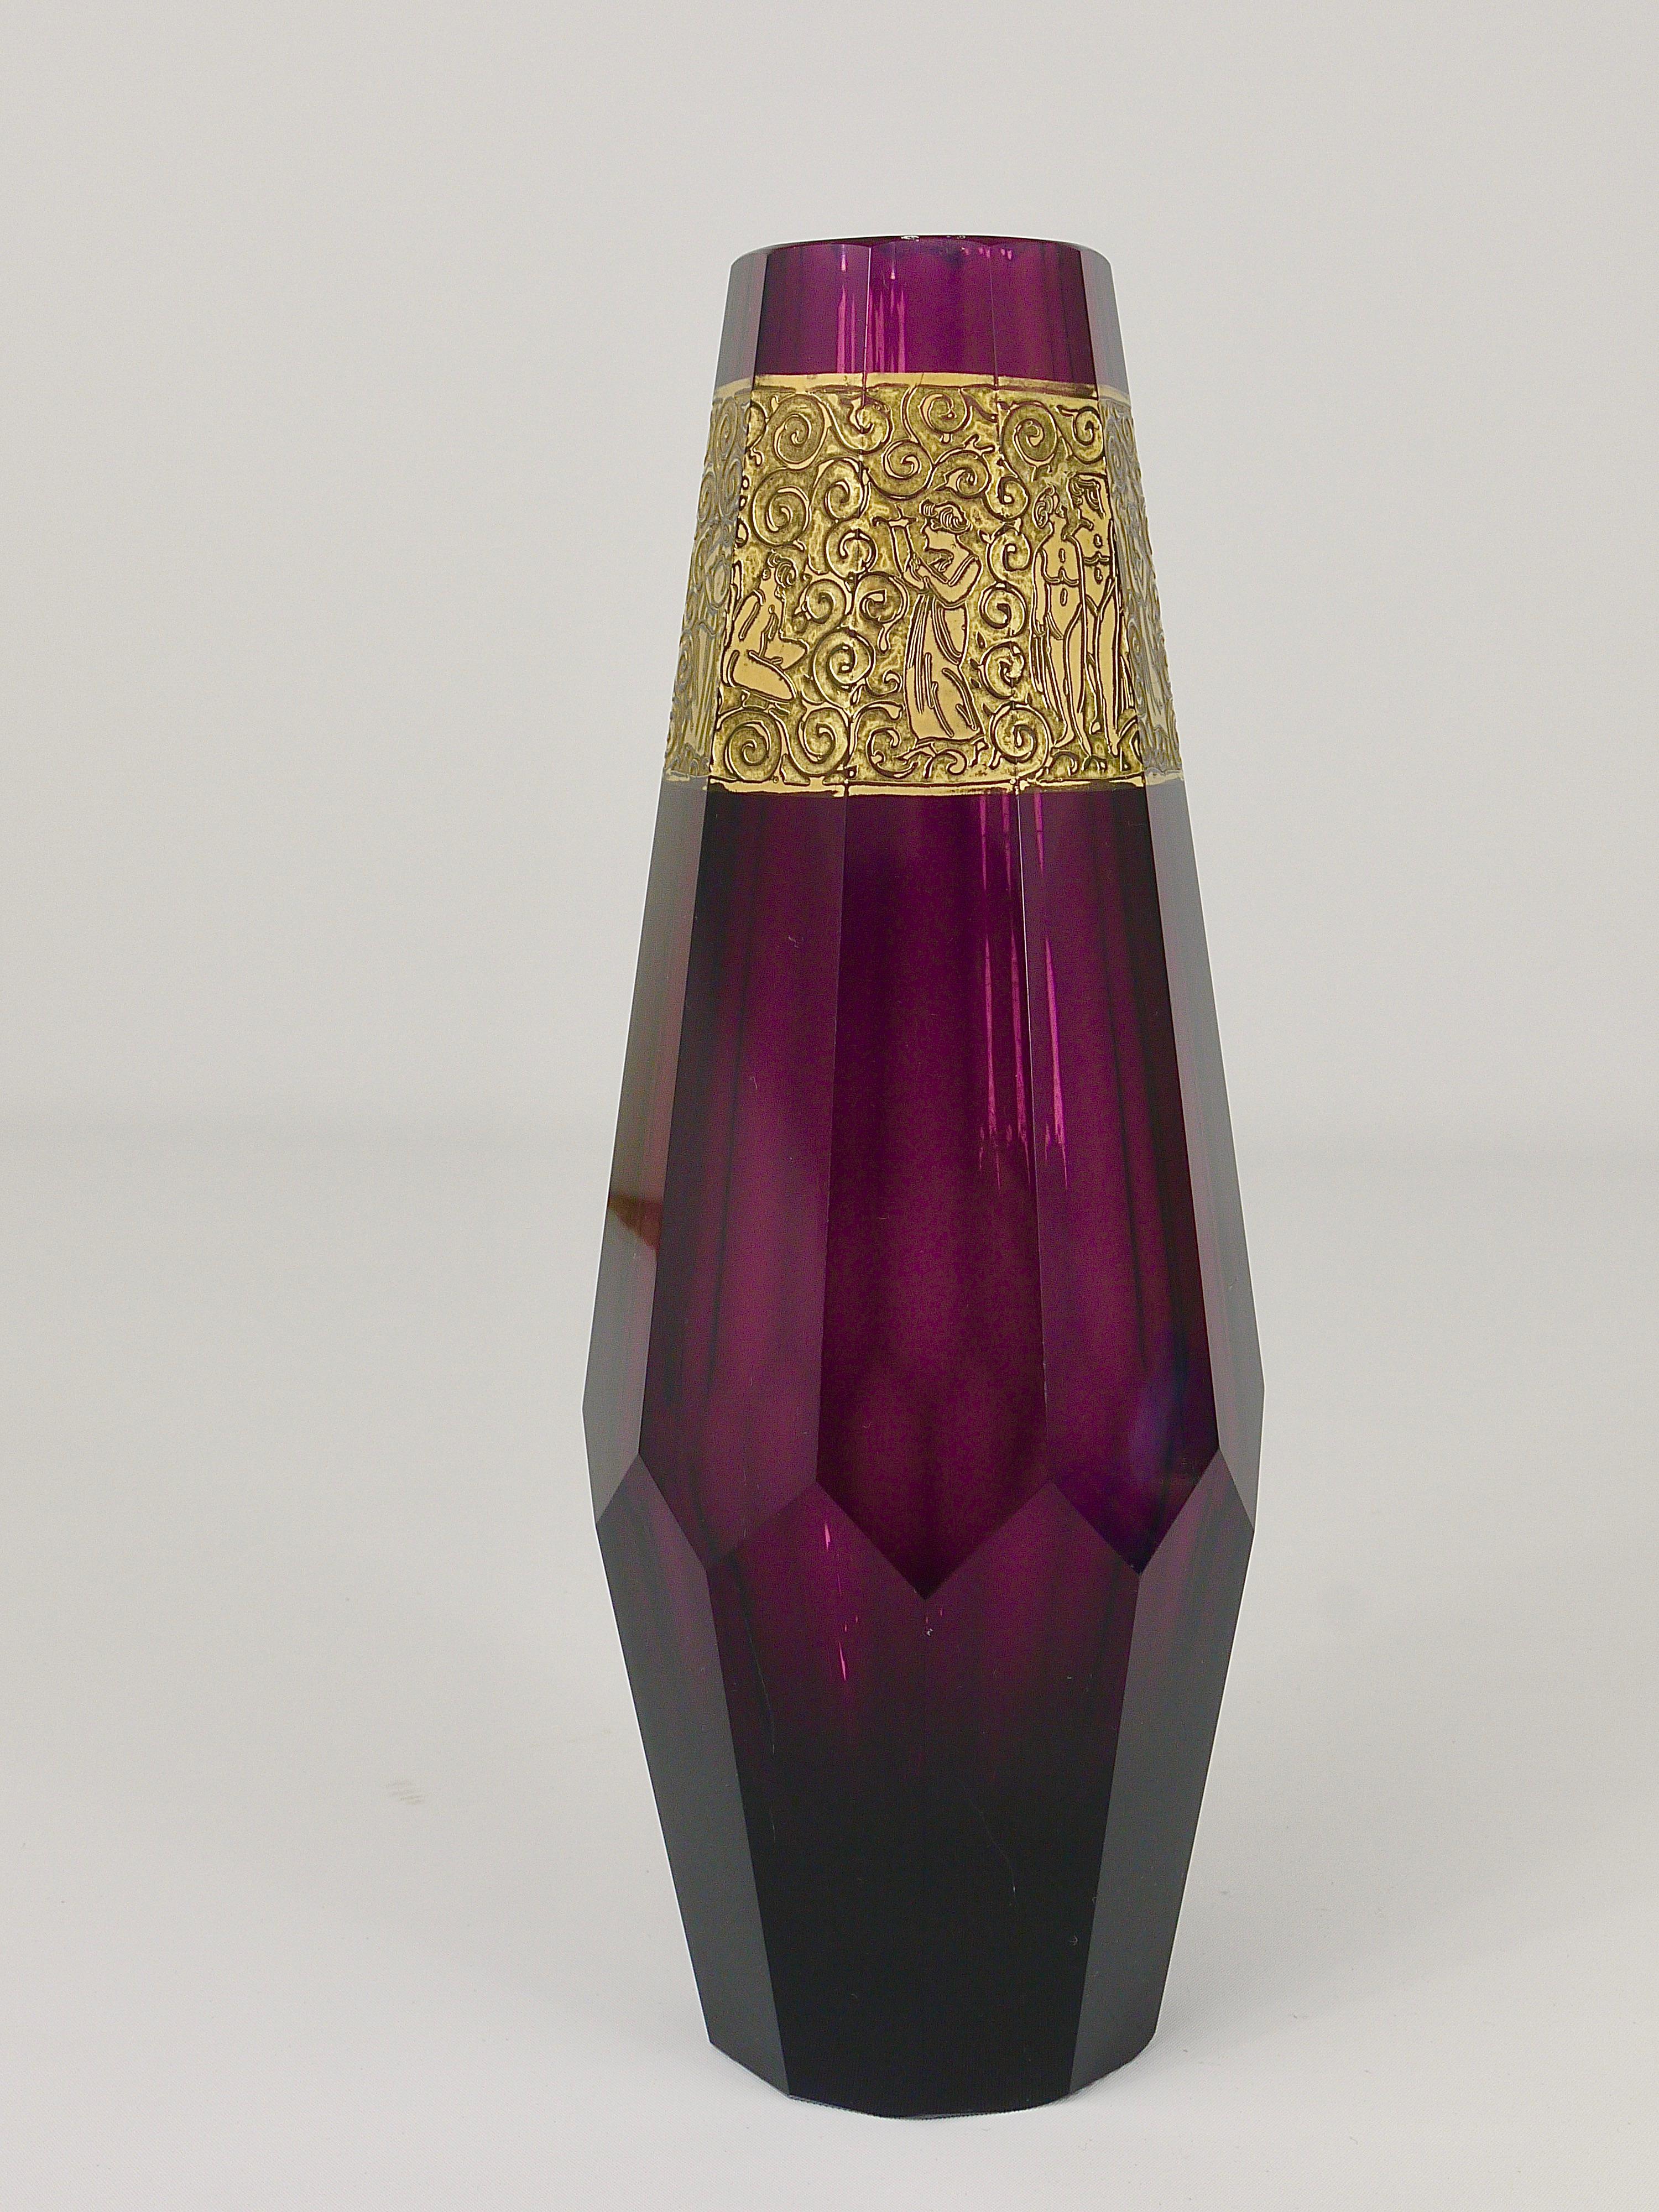 A beautiful and decorative hand blown and polished Art Deco crystal Amethyst glass vase with lovely golden pattern. Dated circa 1920, manufactured by Ludwig Moser Glassworks Karlsbad in Czechoslovakia. Made of facetted purple crystal cut glass. In